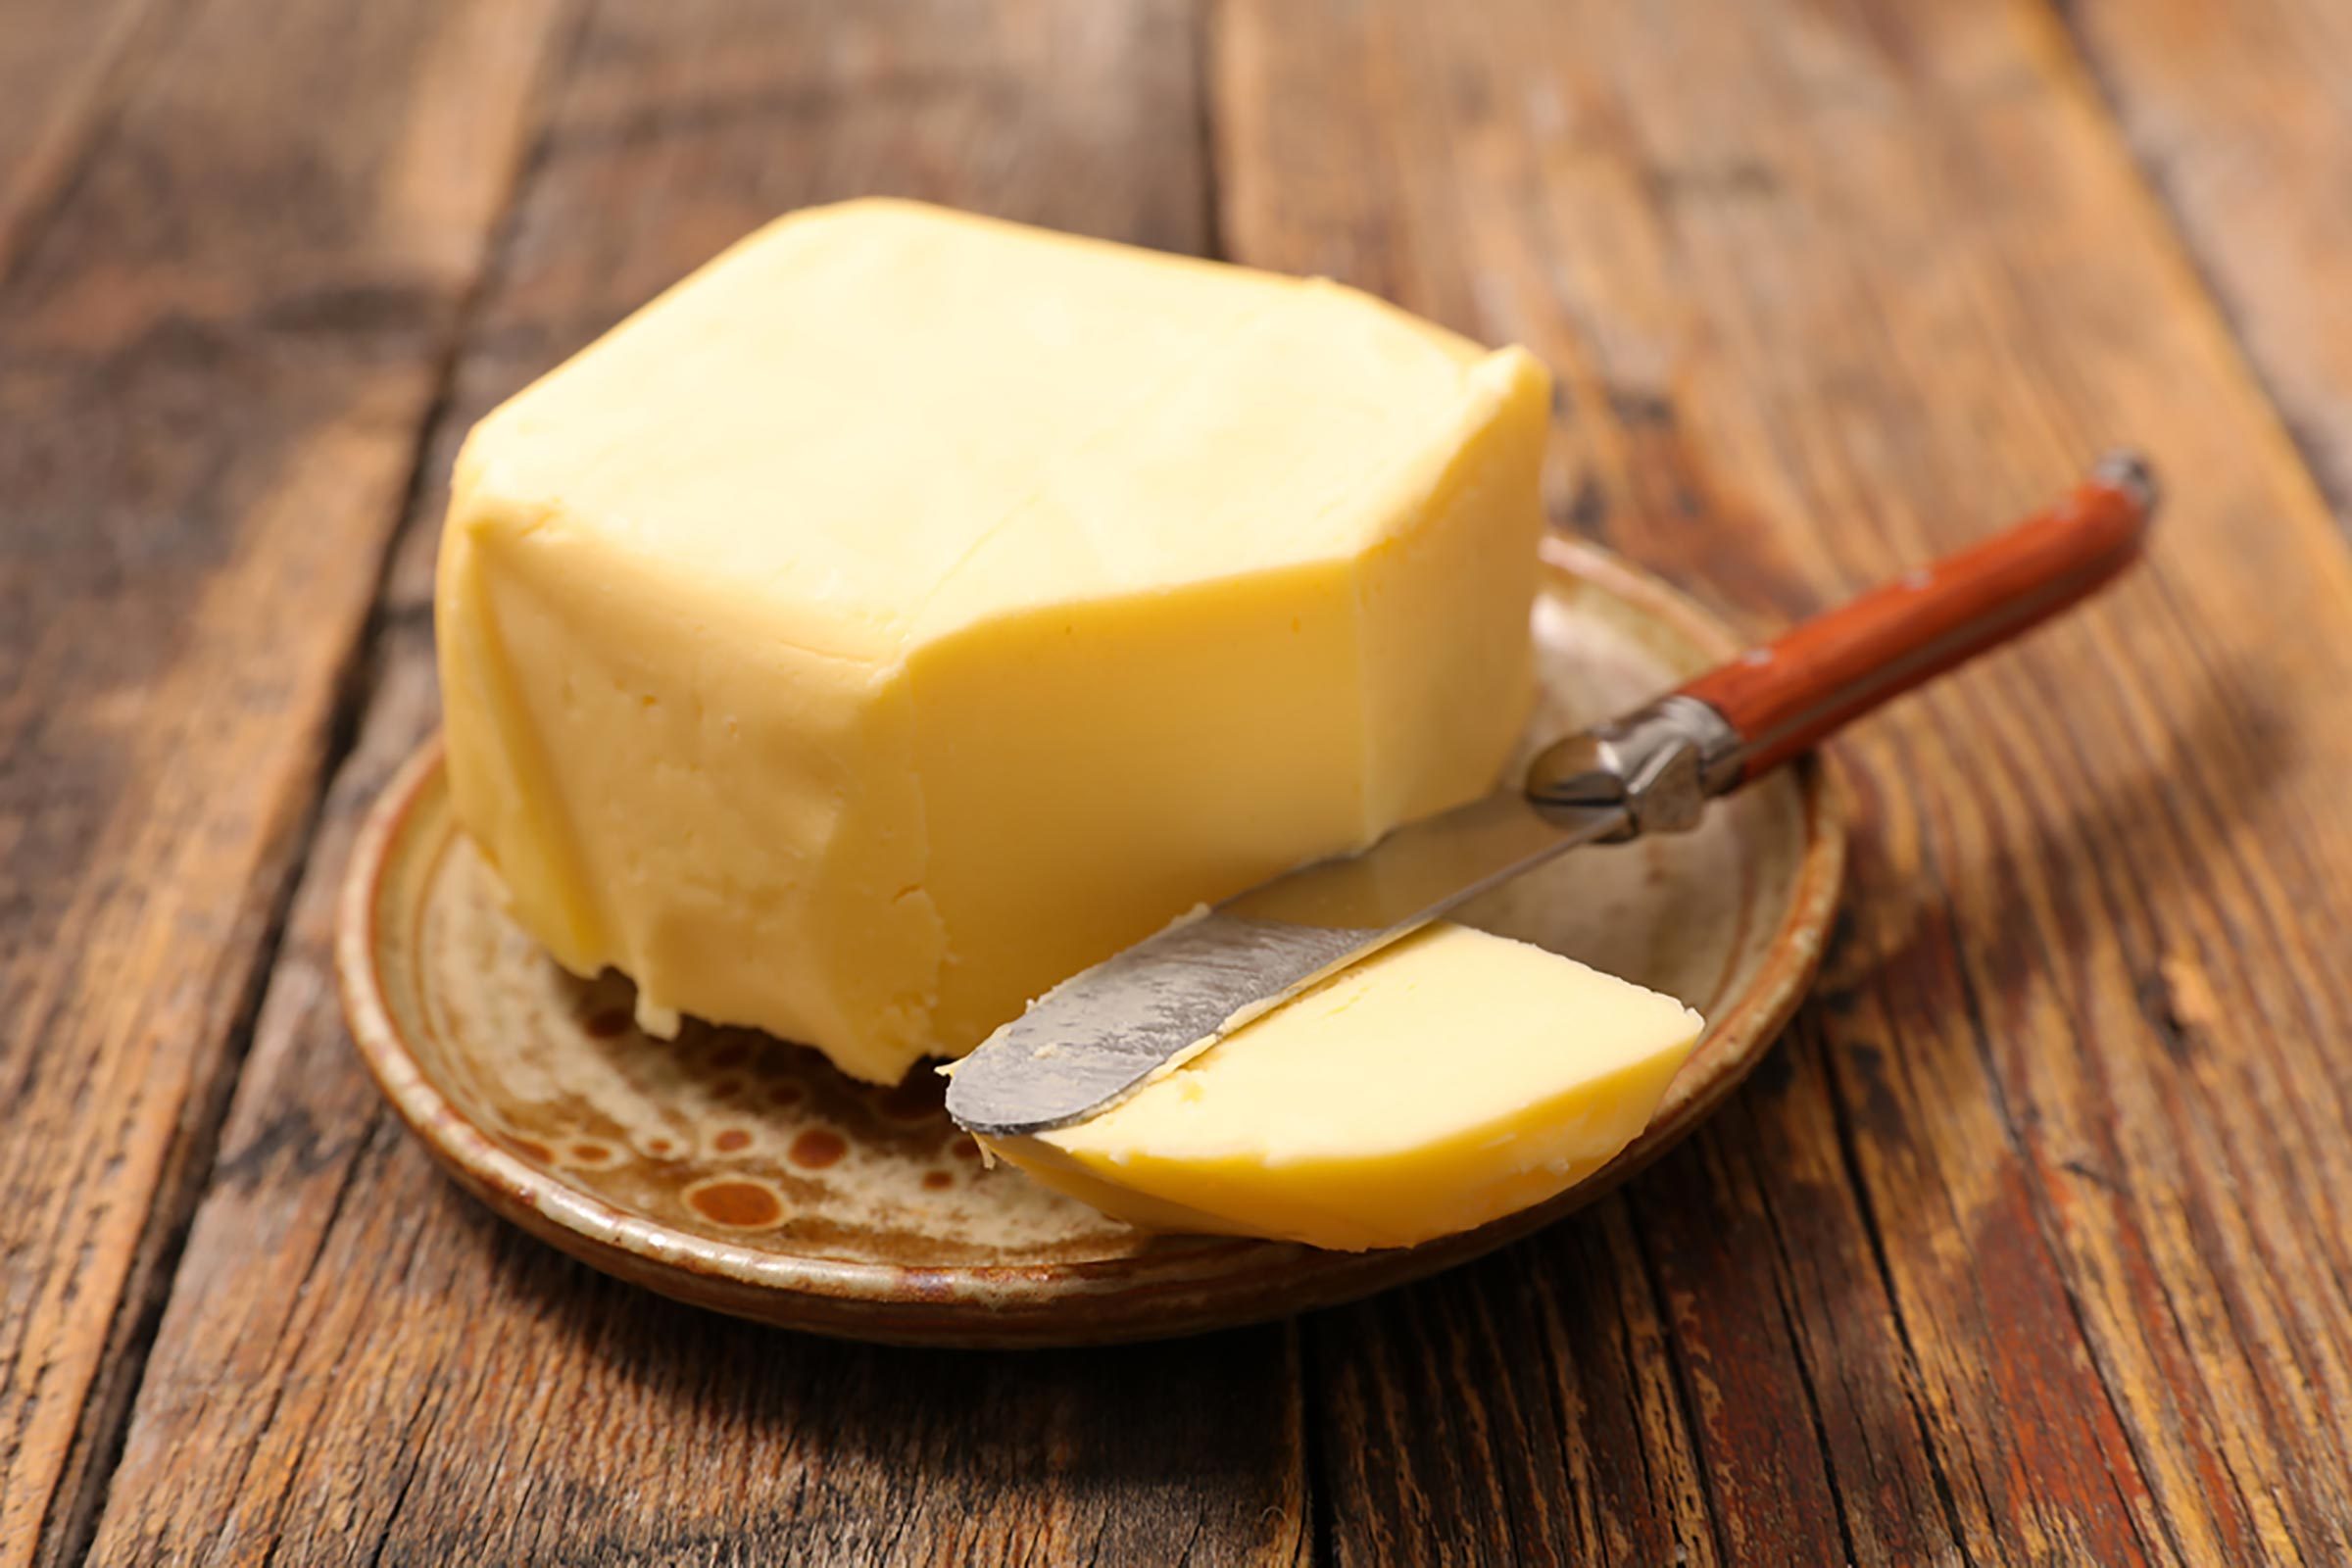 Do You Really Need to Refrigerate Butter? | Reader's Digest